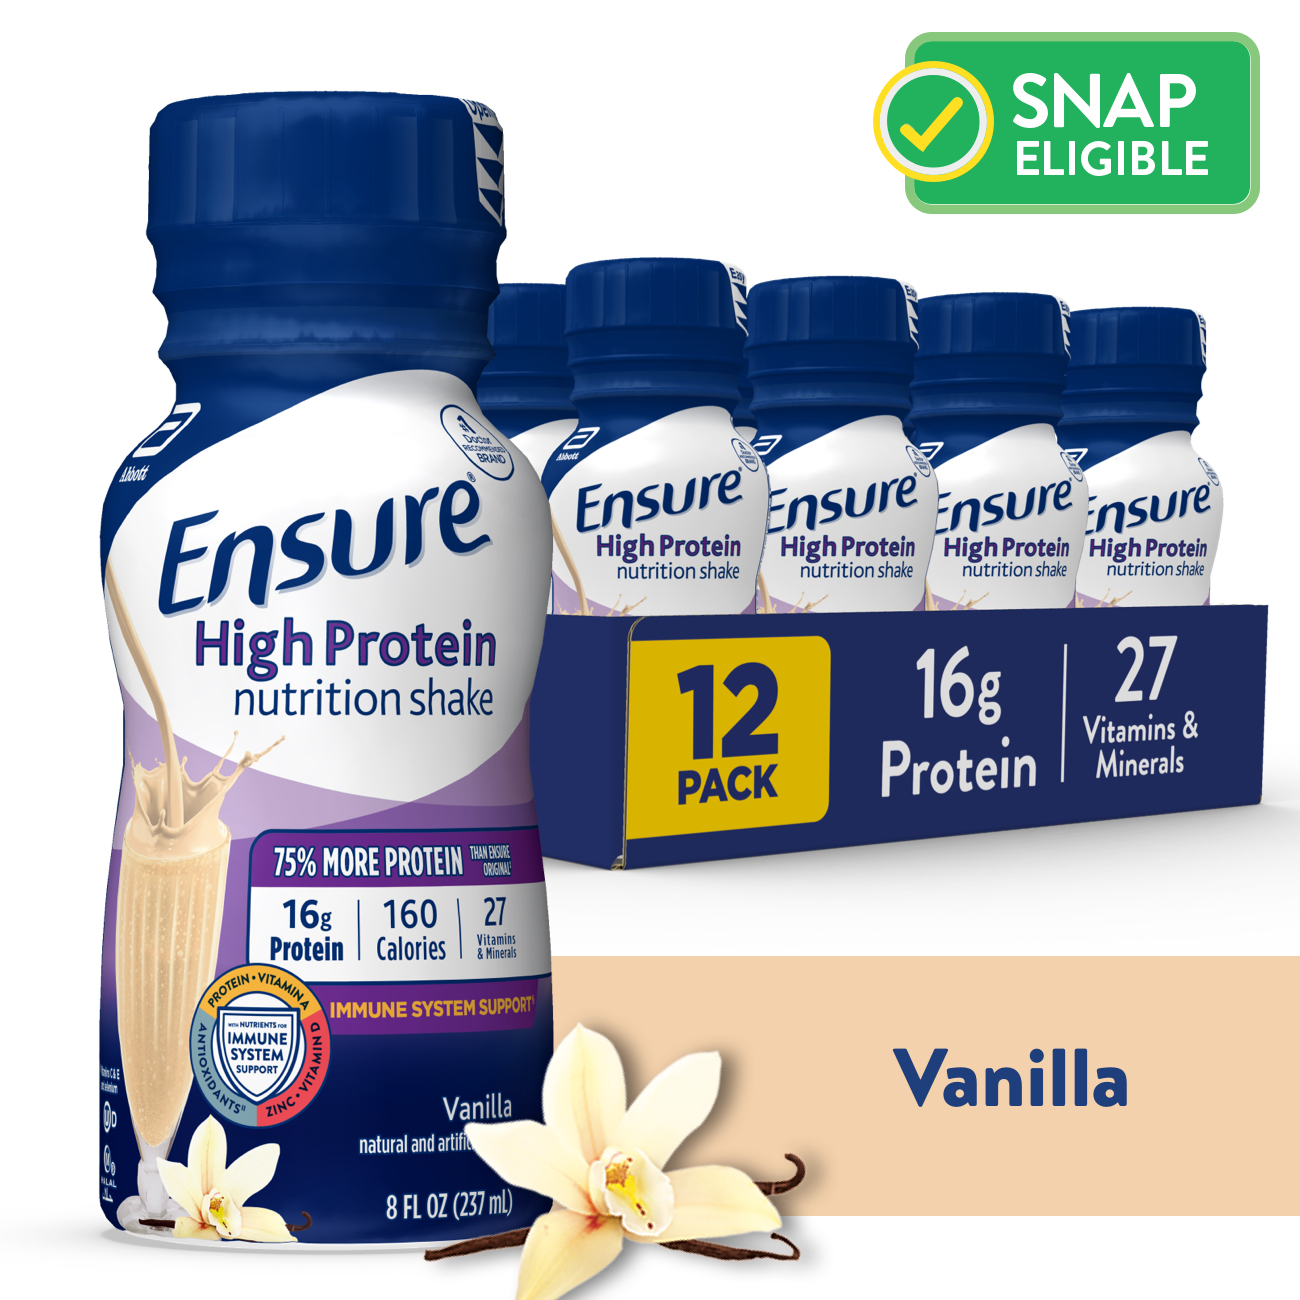 Ensure High Protein Nutrition Shake, Vanilla, 8 fl oz, 12 Count - image 1 of 14